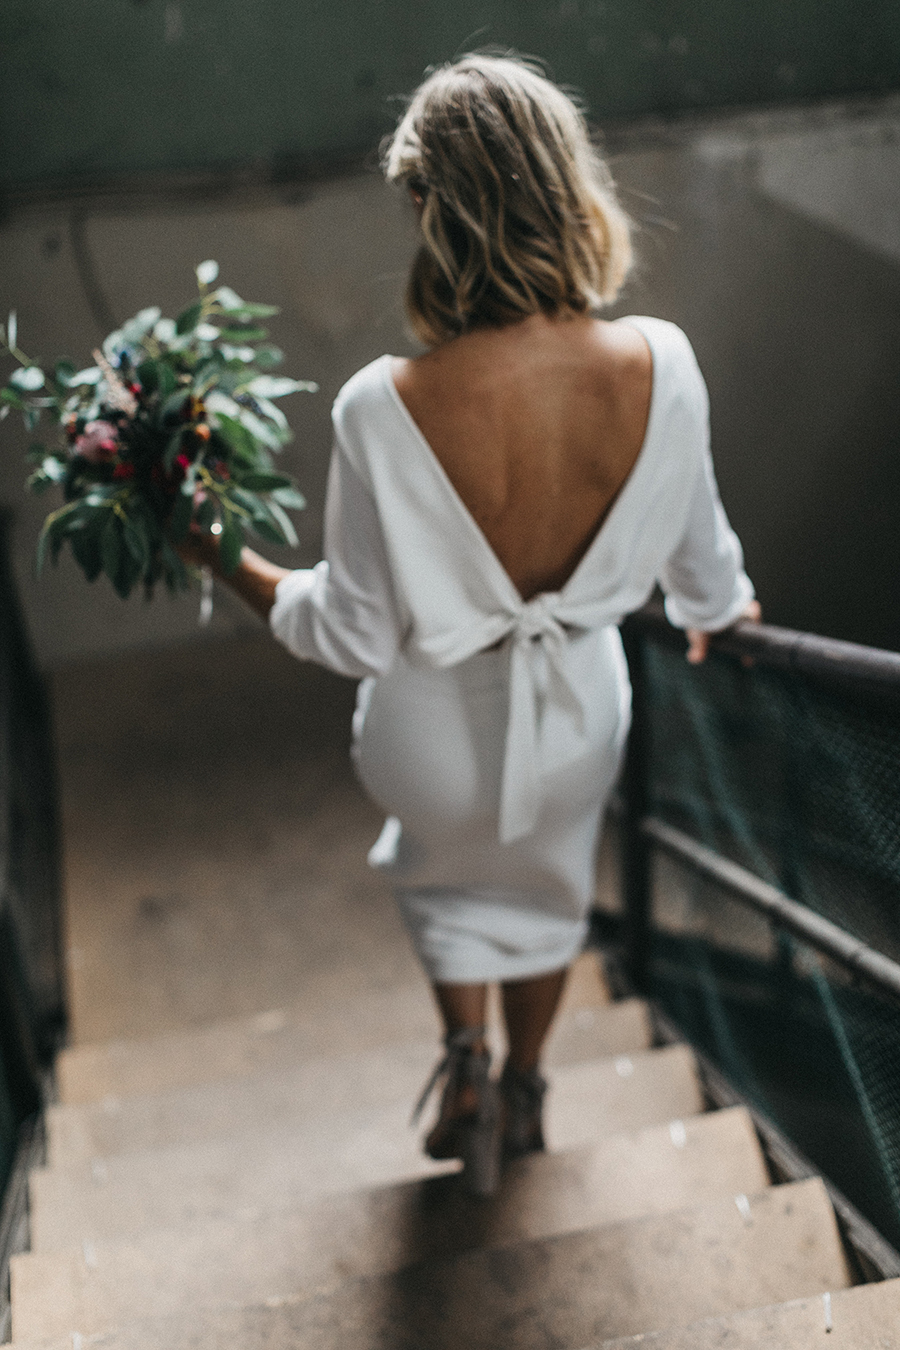 This mid length white dress with long sleeves and cut back is the perfect option for a stylish bride. // See more: 20 Stunning Civil Wedding Outfit Ideas to Make it Official In Style. // mysweetengagement.com